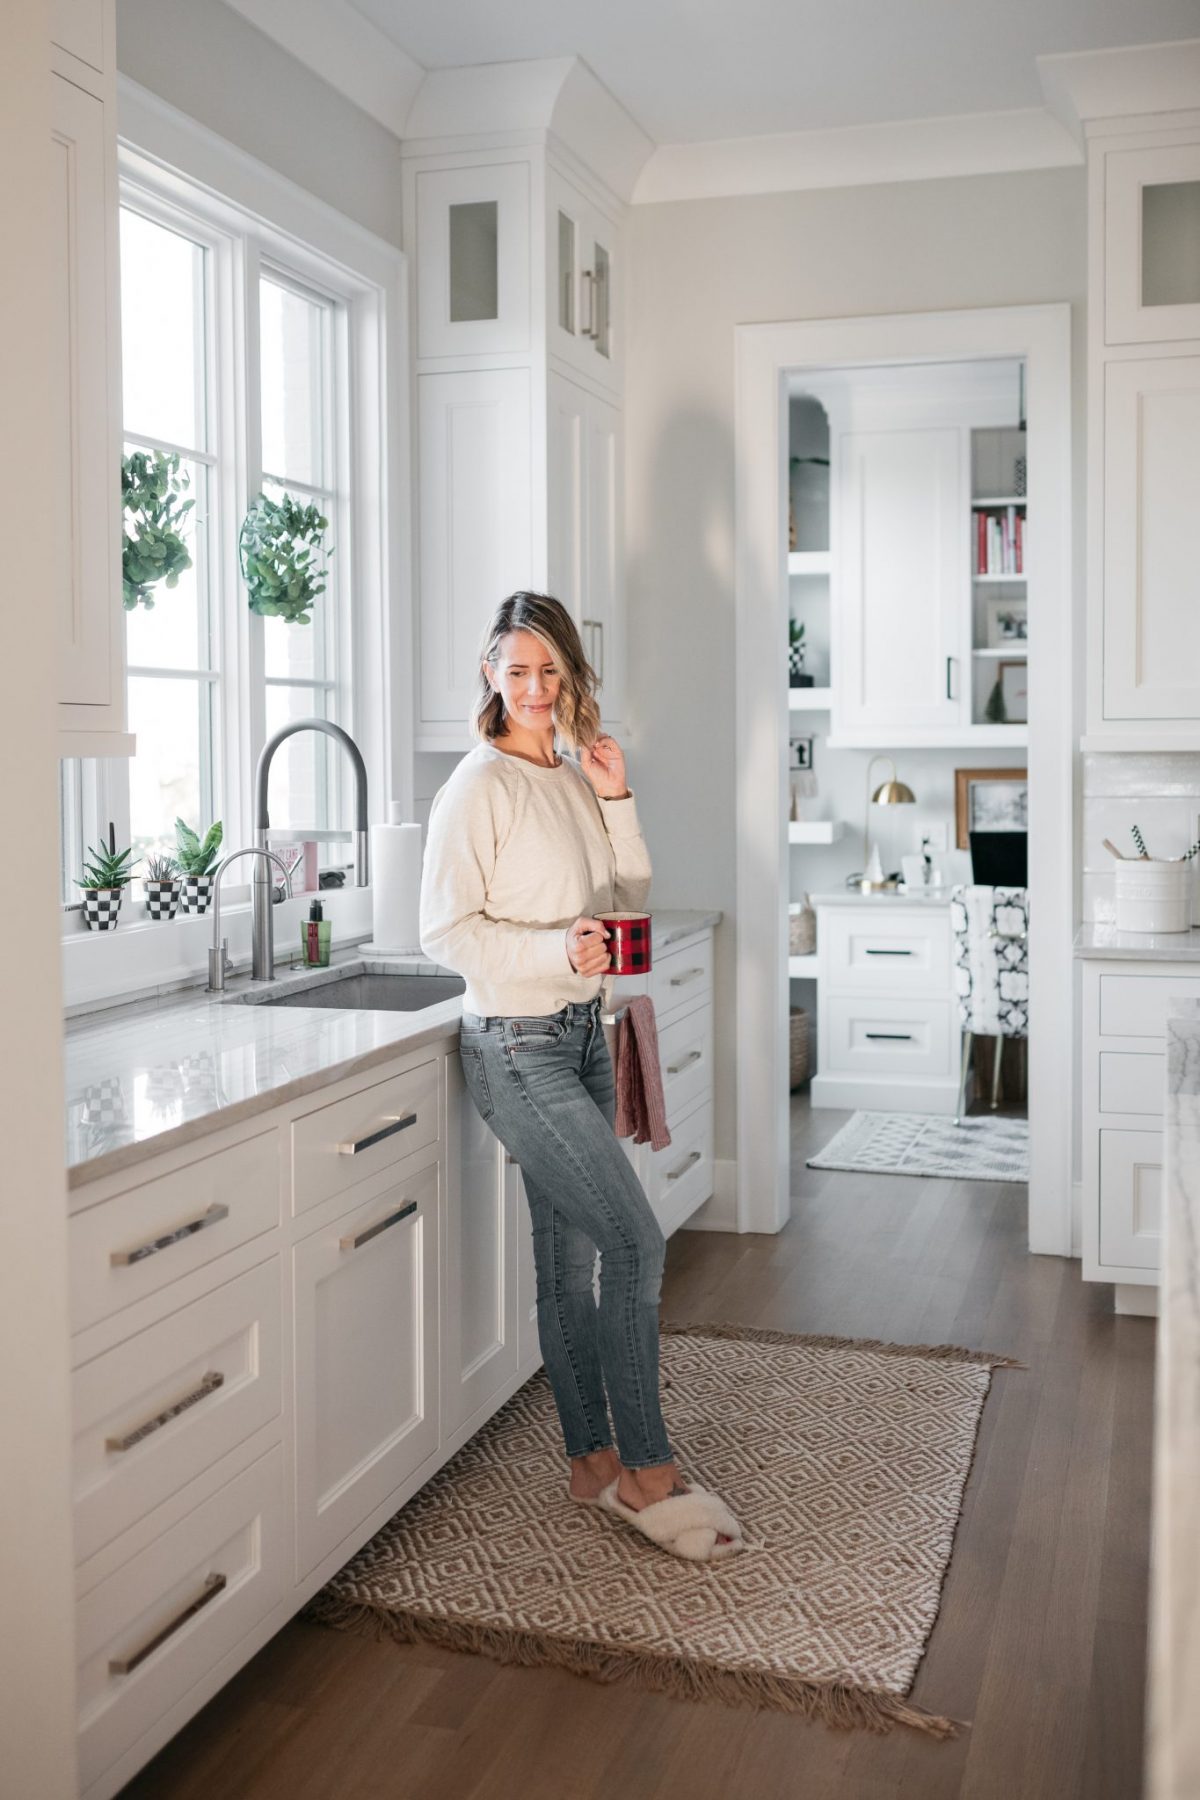 Suzanne standing in her kitchen, featuring the jute rug in front of the sink